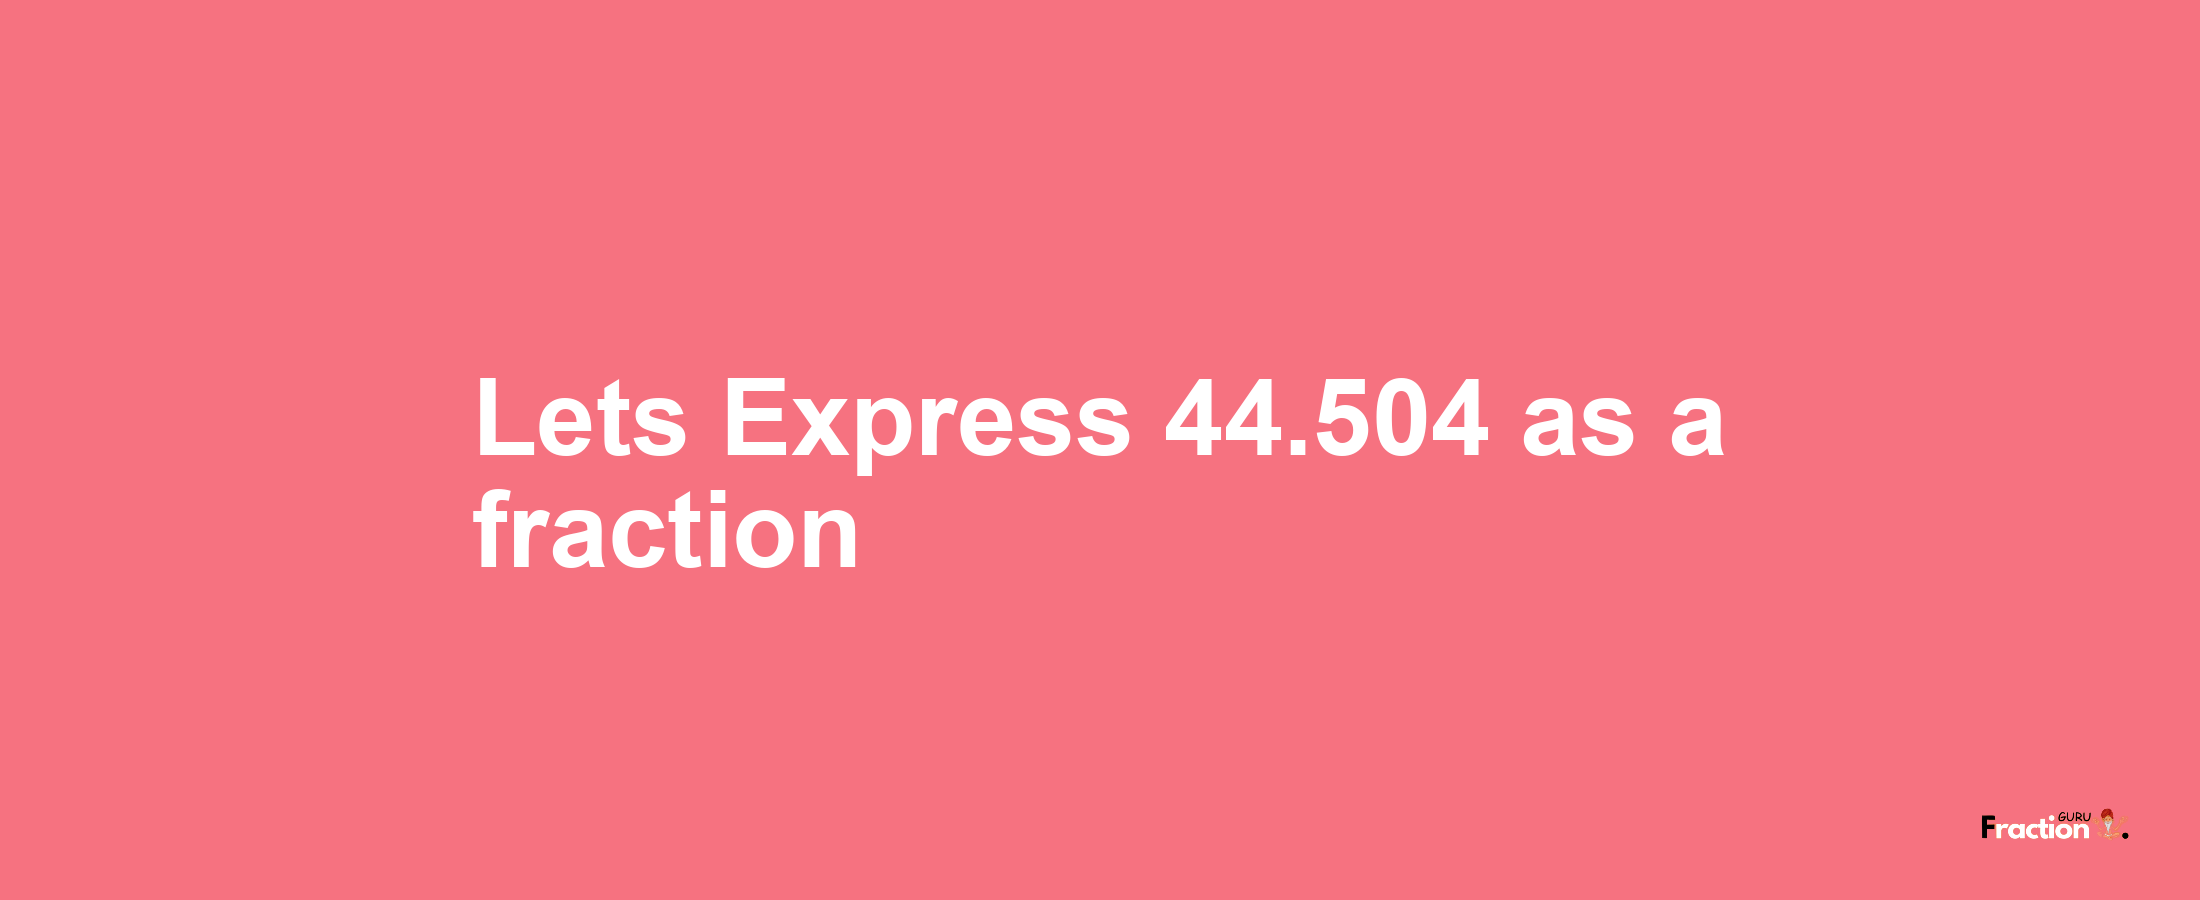 Lets Express 44.504 as afraction